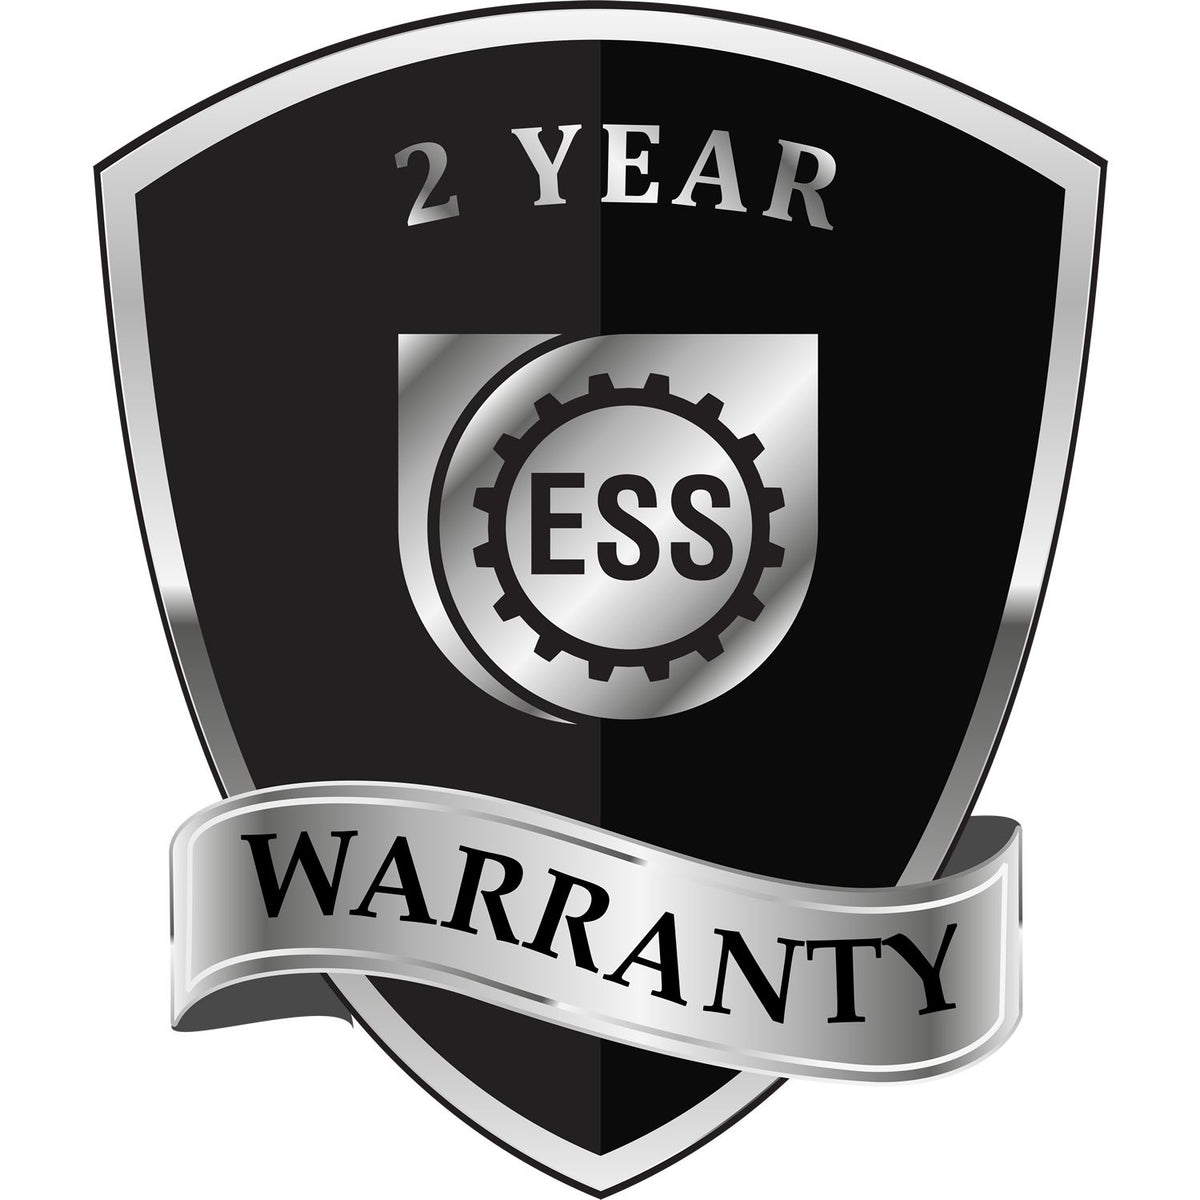 A black and silver badge or emblem showing warranty information for the Hybrid West Virginia Engineer Seal